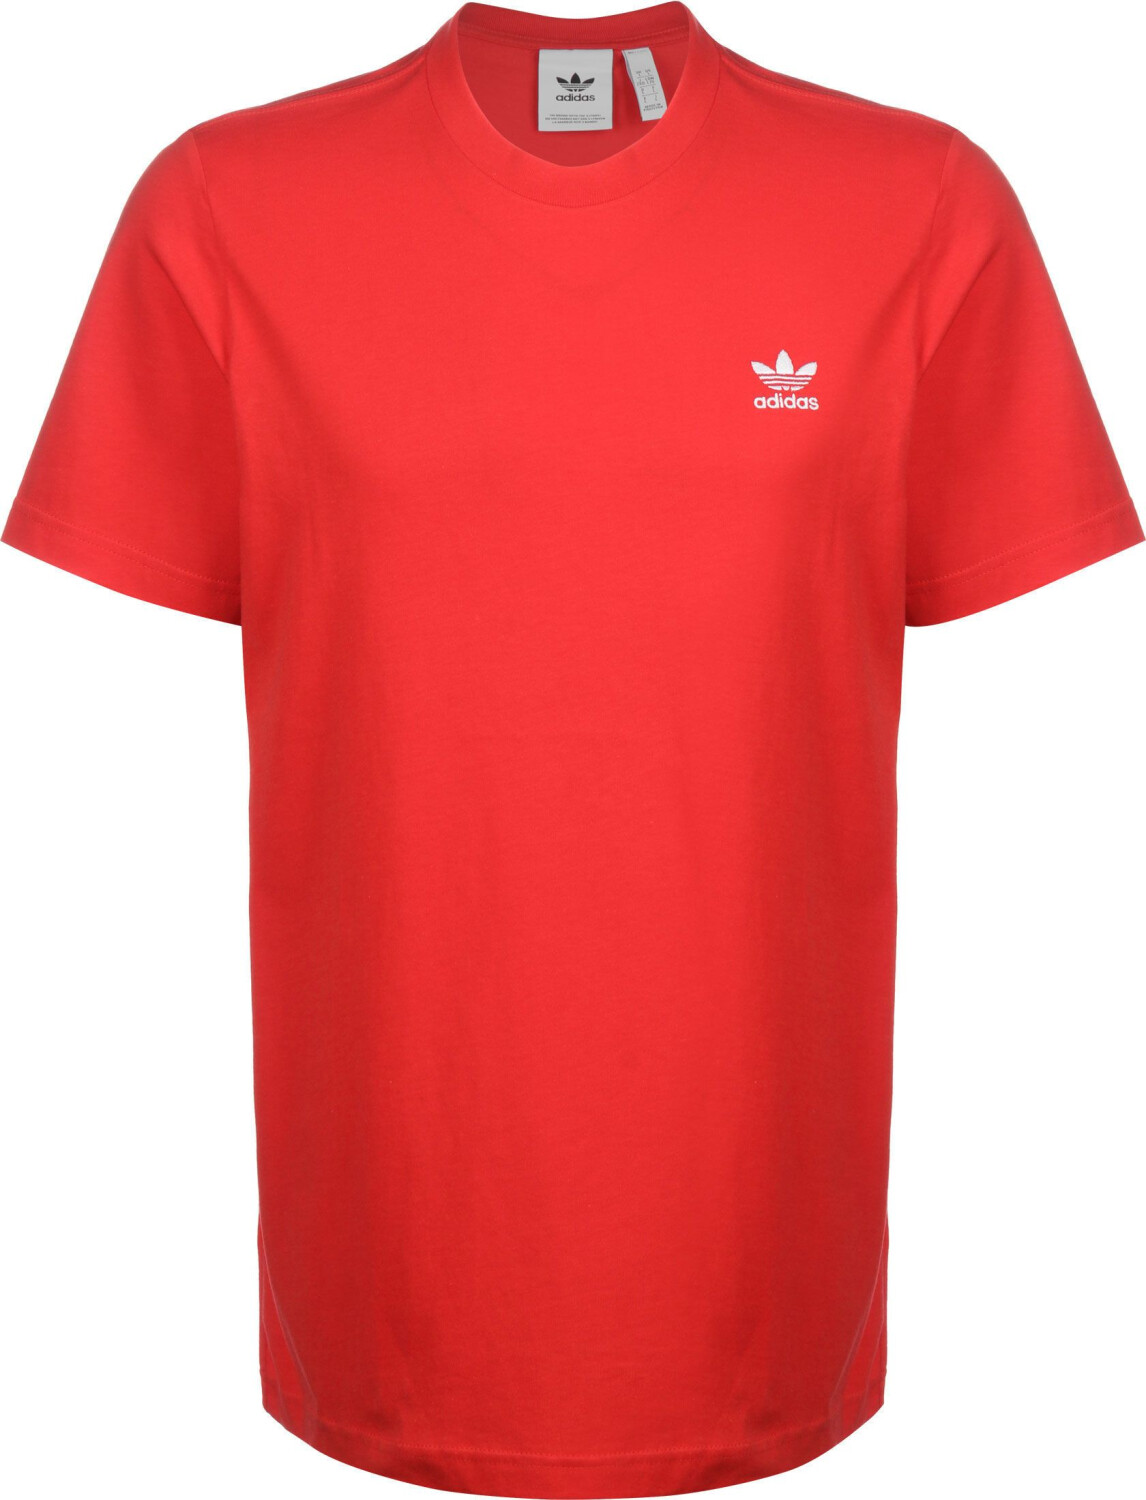 Buy Adidas Trefoil Essentials T-Shirt Deals (Today) from on – Best £9.99